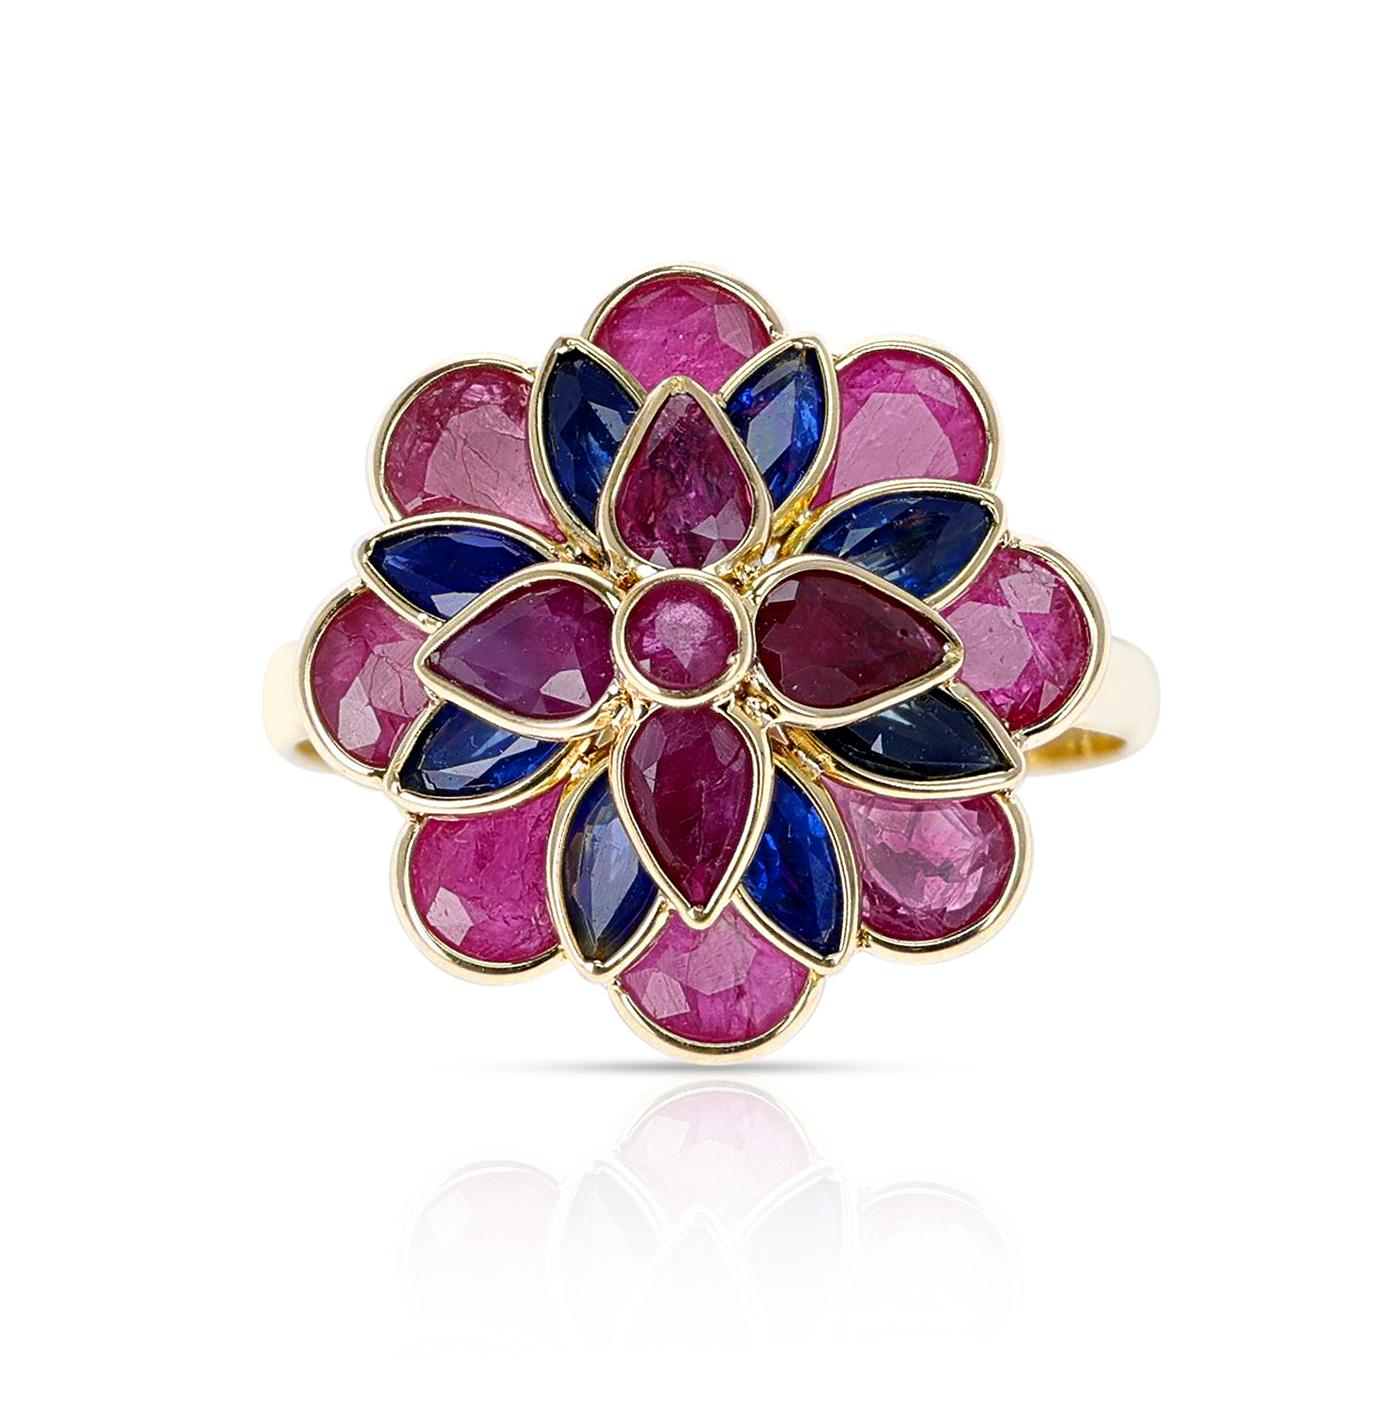 A Ruby and Sapphire Floral Ring, 18K Yellow Gold. Ring Size US 7.25.